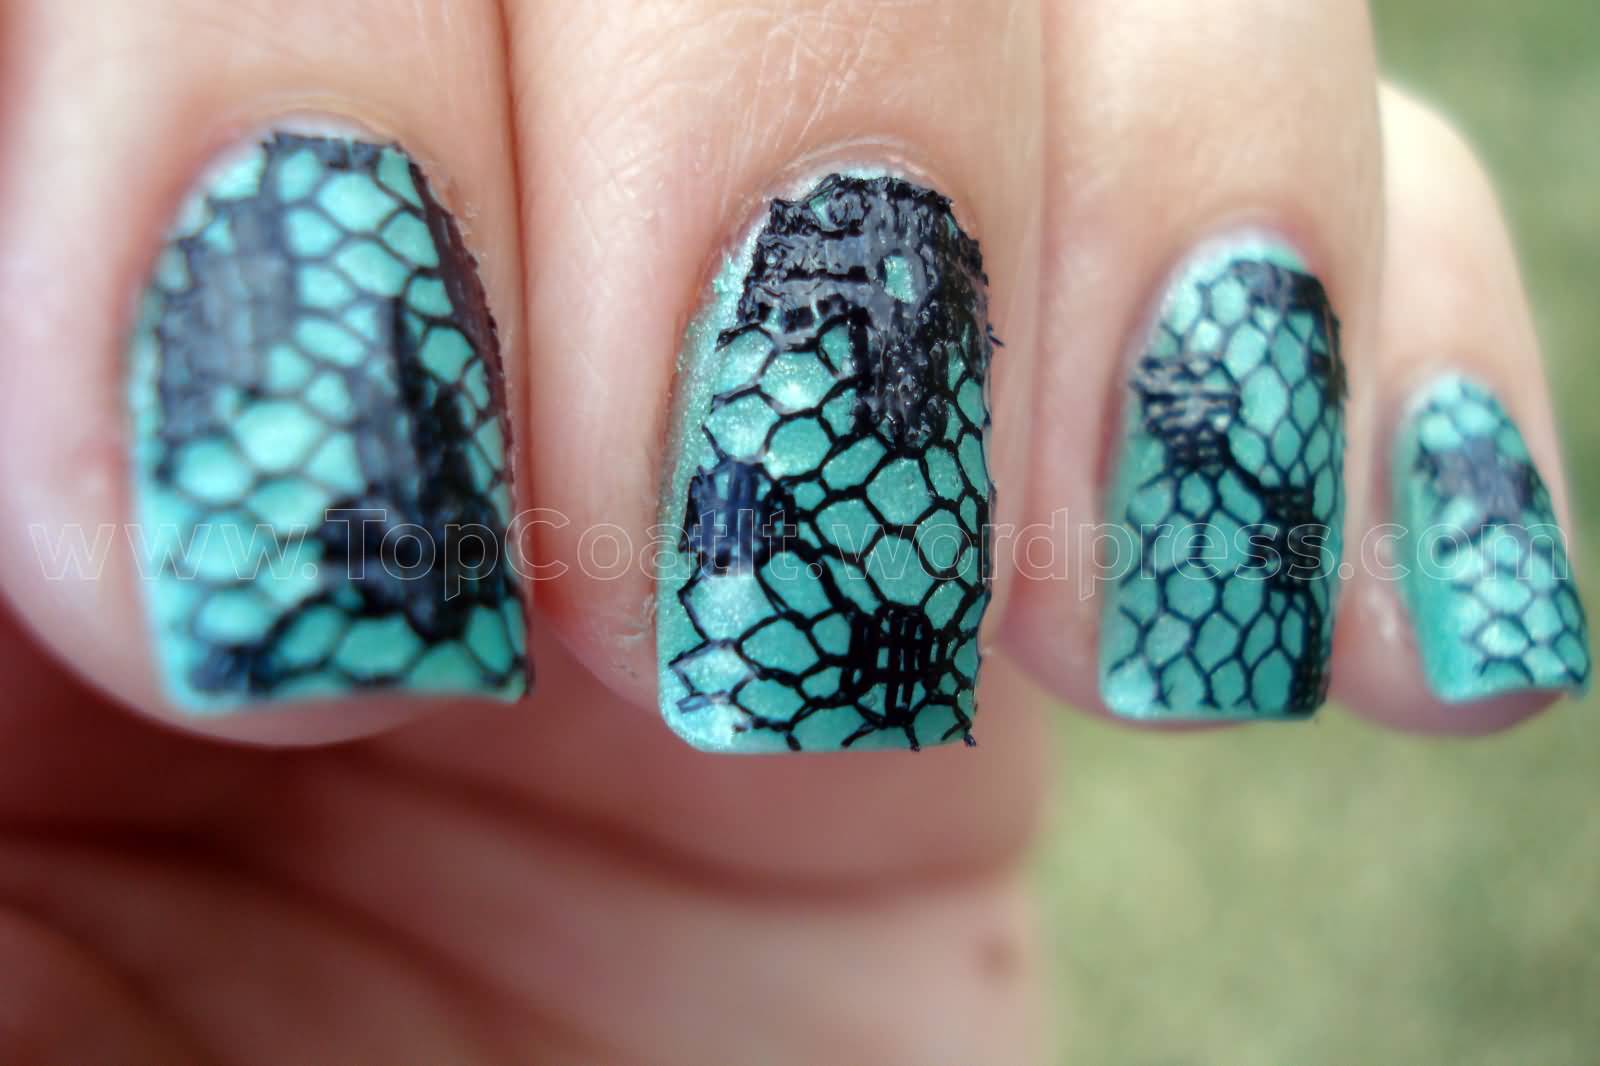 Blue Nails With Black Lace Net Design Nail Art